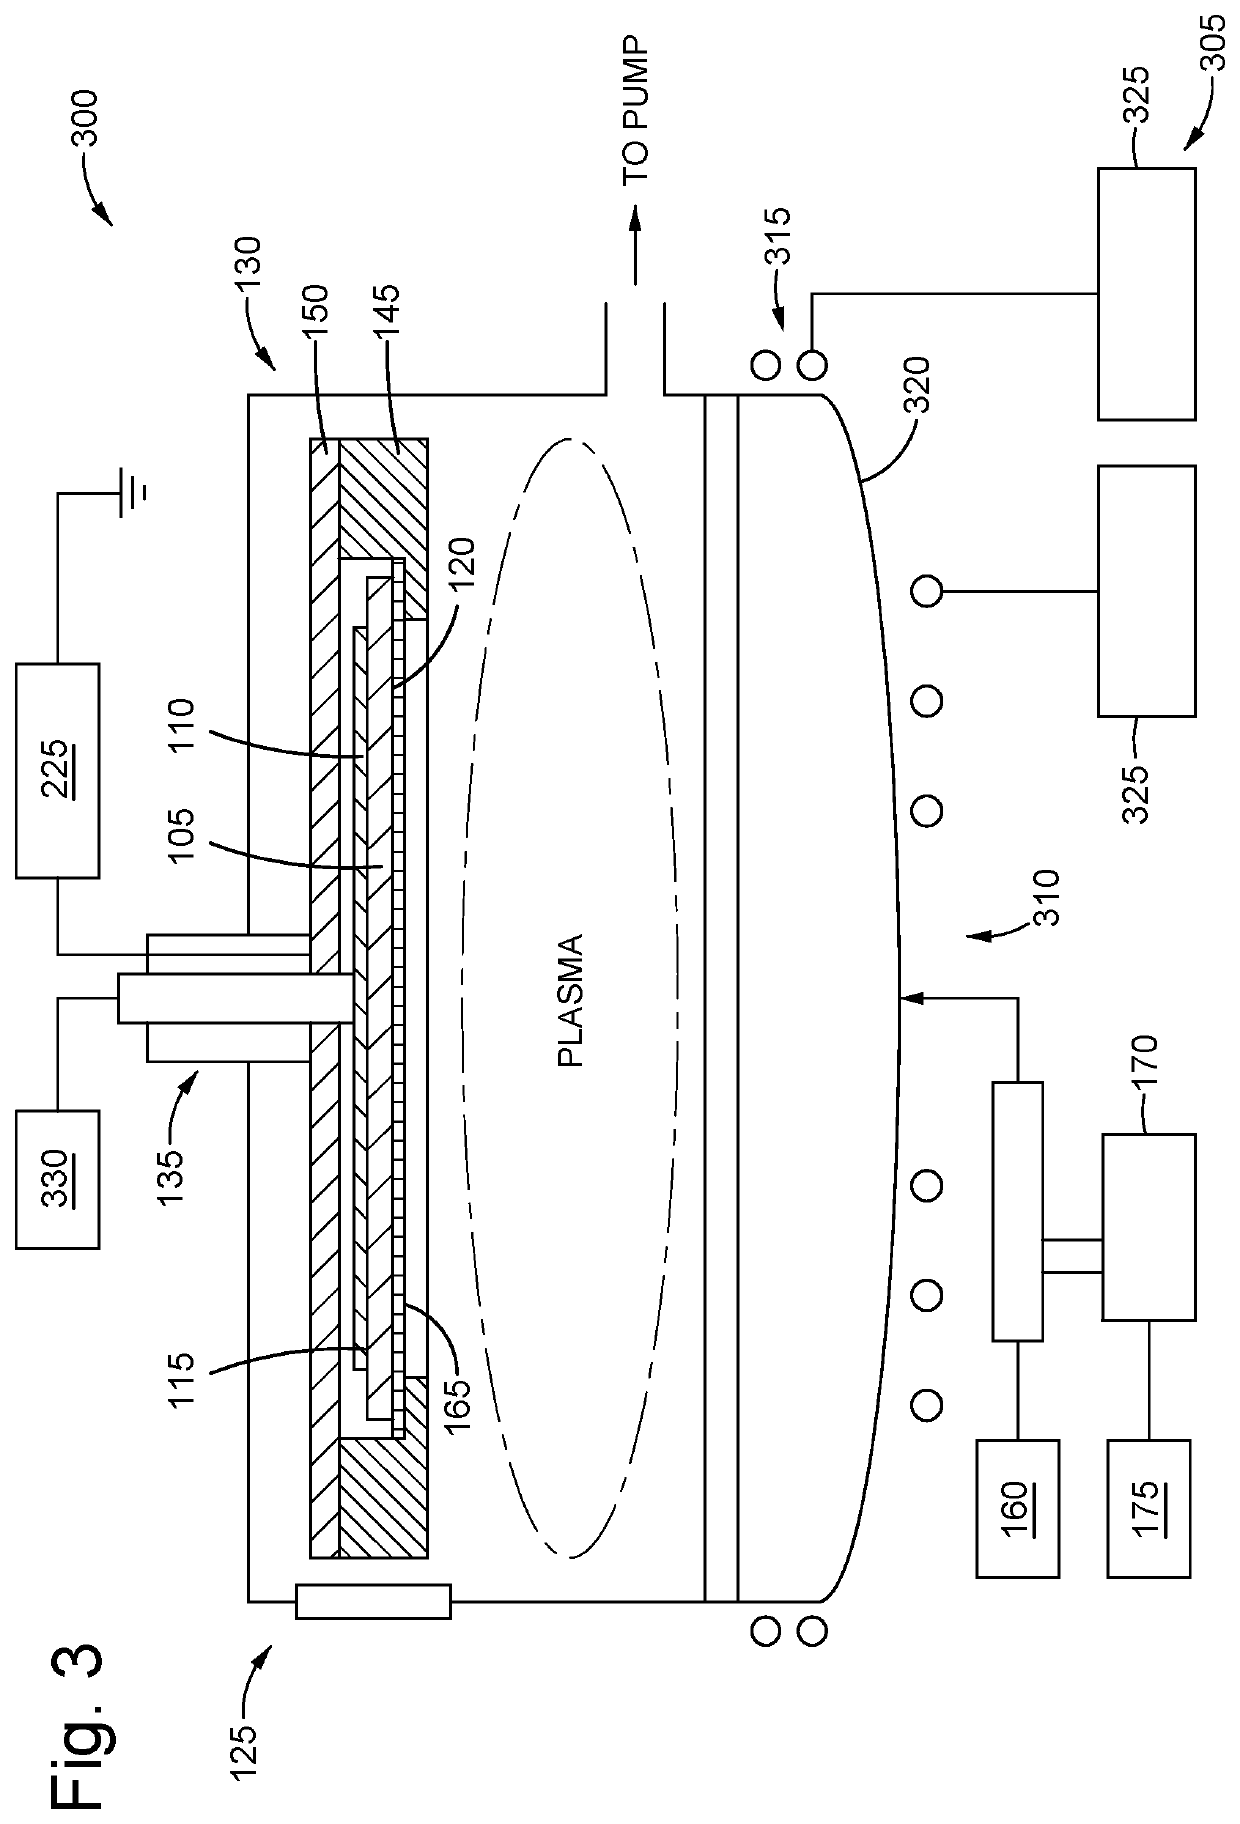 Methods and apparatus to eliminate wafer bow for CVD and patterning hvm systems